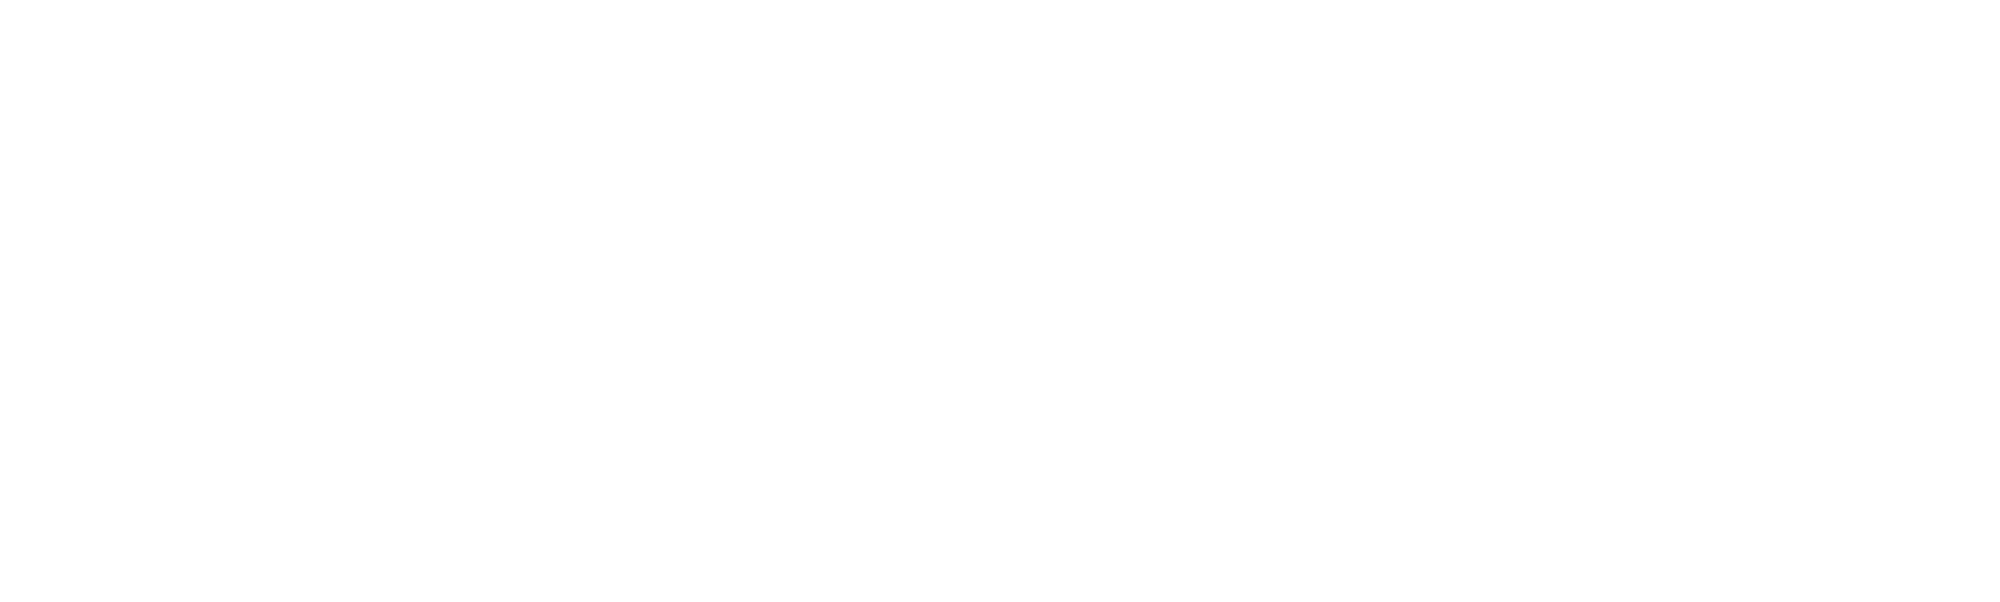 Greenway_Weed_Solutions_logo_GWS_Mono-White